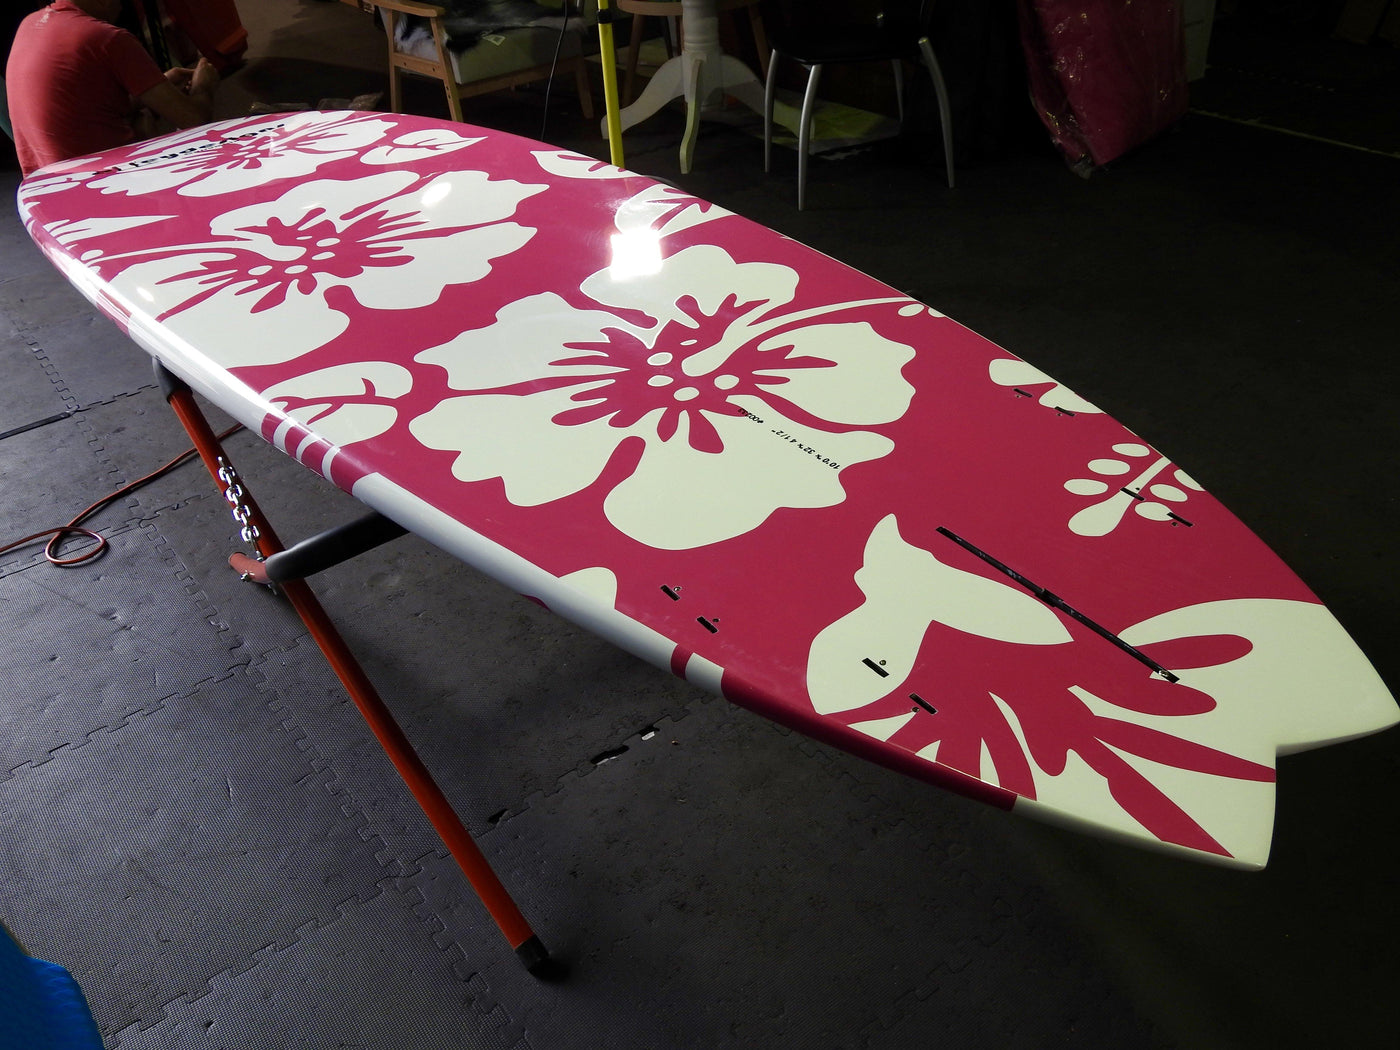 10' x 32" Bamboo Pink Hibiscus Flowers Performance Alleydesigns SUP @ 9kg - Alleydesigns  Pty Ltd                                             ABN: 44165571264